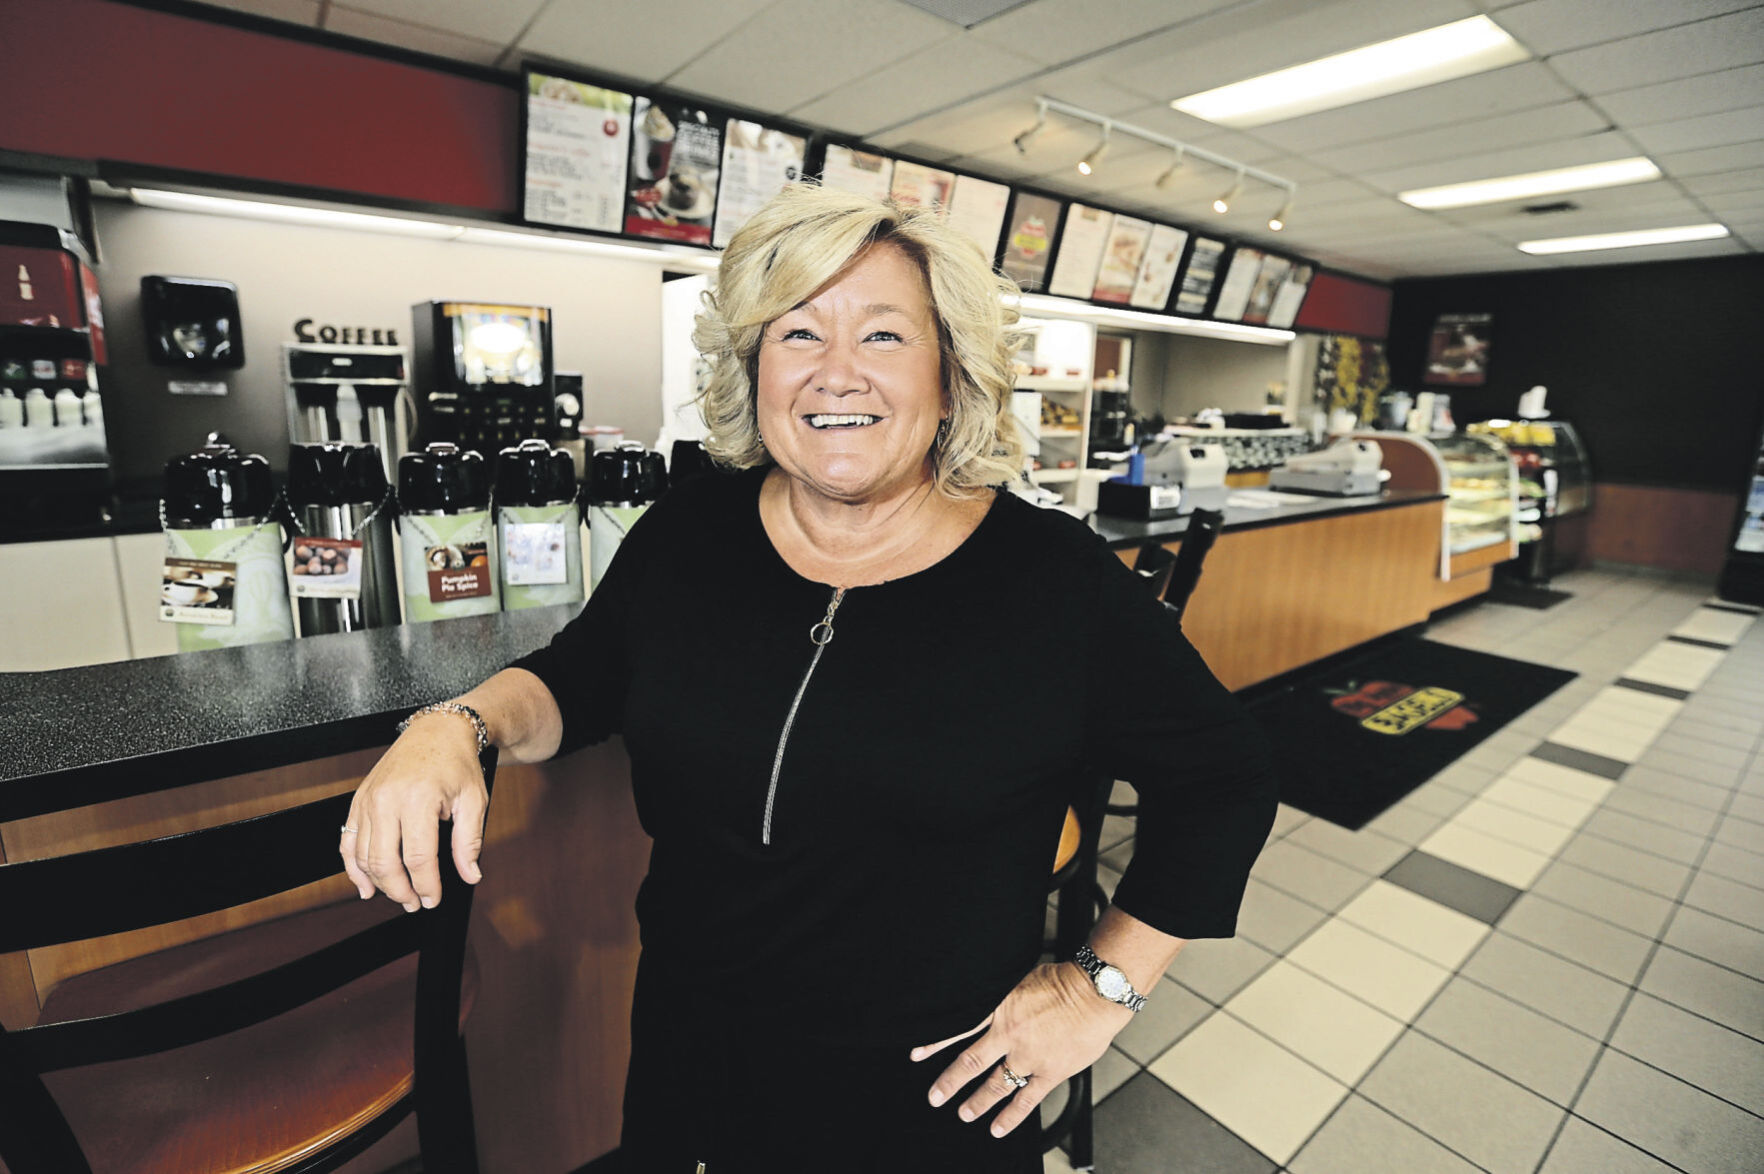 Judy Faulhaber, owner of Big Apple Bagels in Dubuque, is the Woman Who Makes a Difference award winner.    PHOTO CREDIT: Jessica Reilly